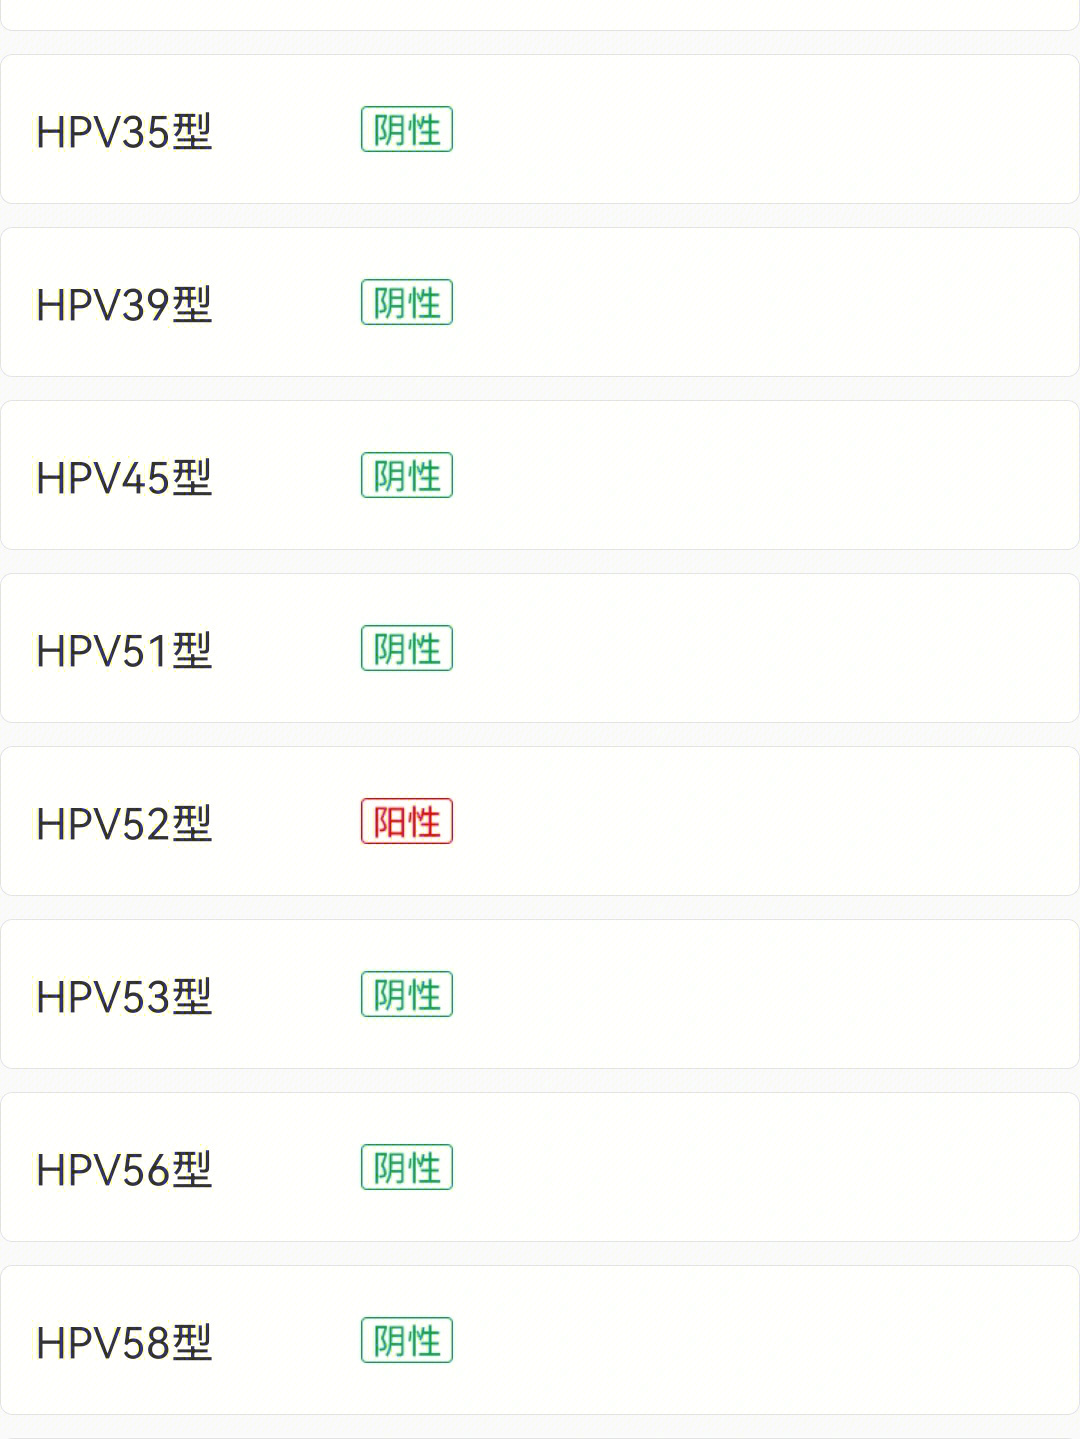 hpv52/霉菌